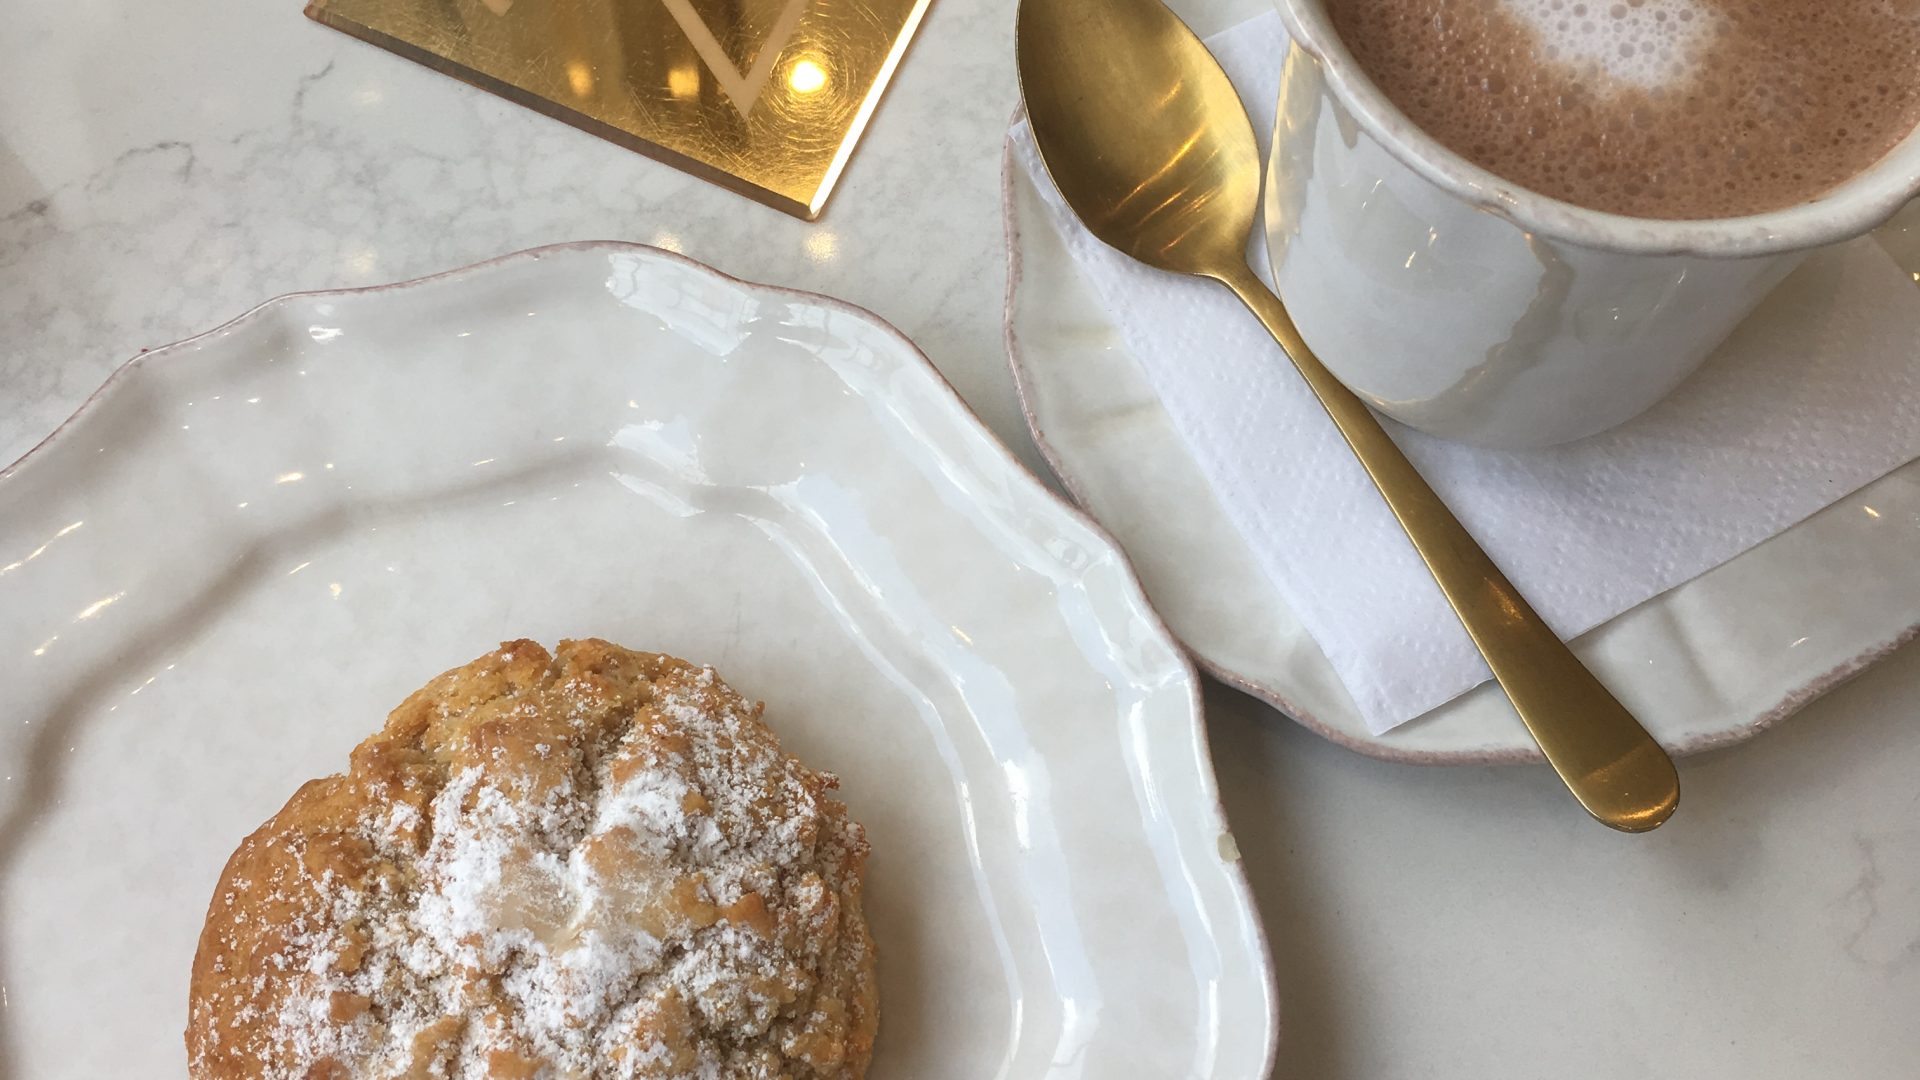 A scone and a hot chocolate from Sorelle and Co.